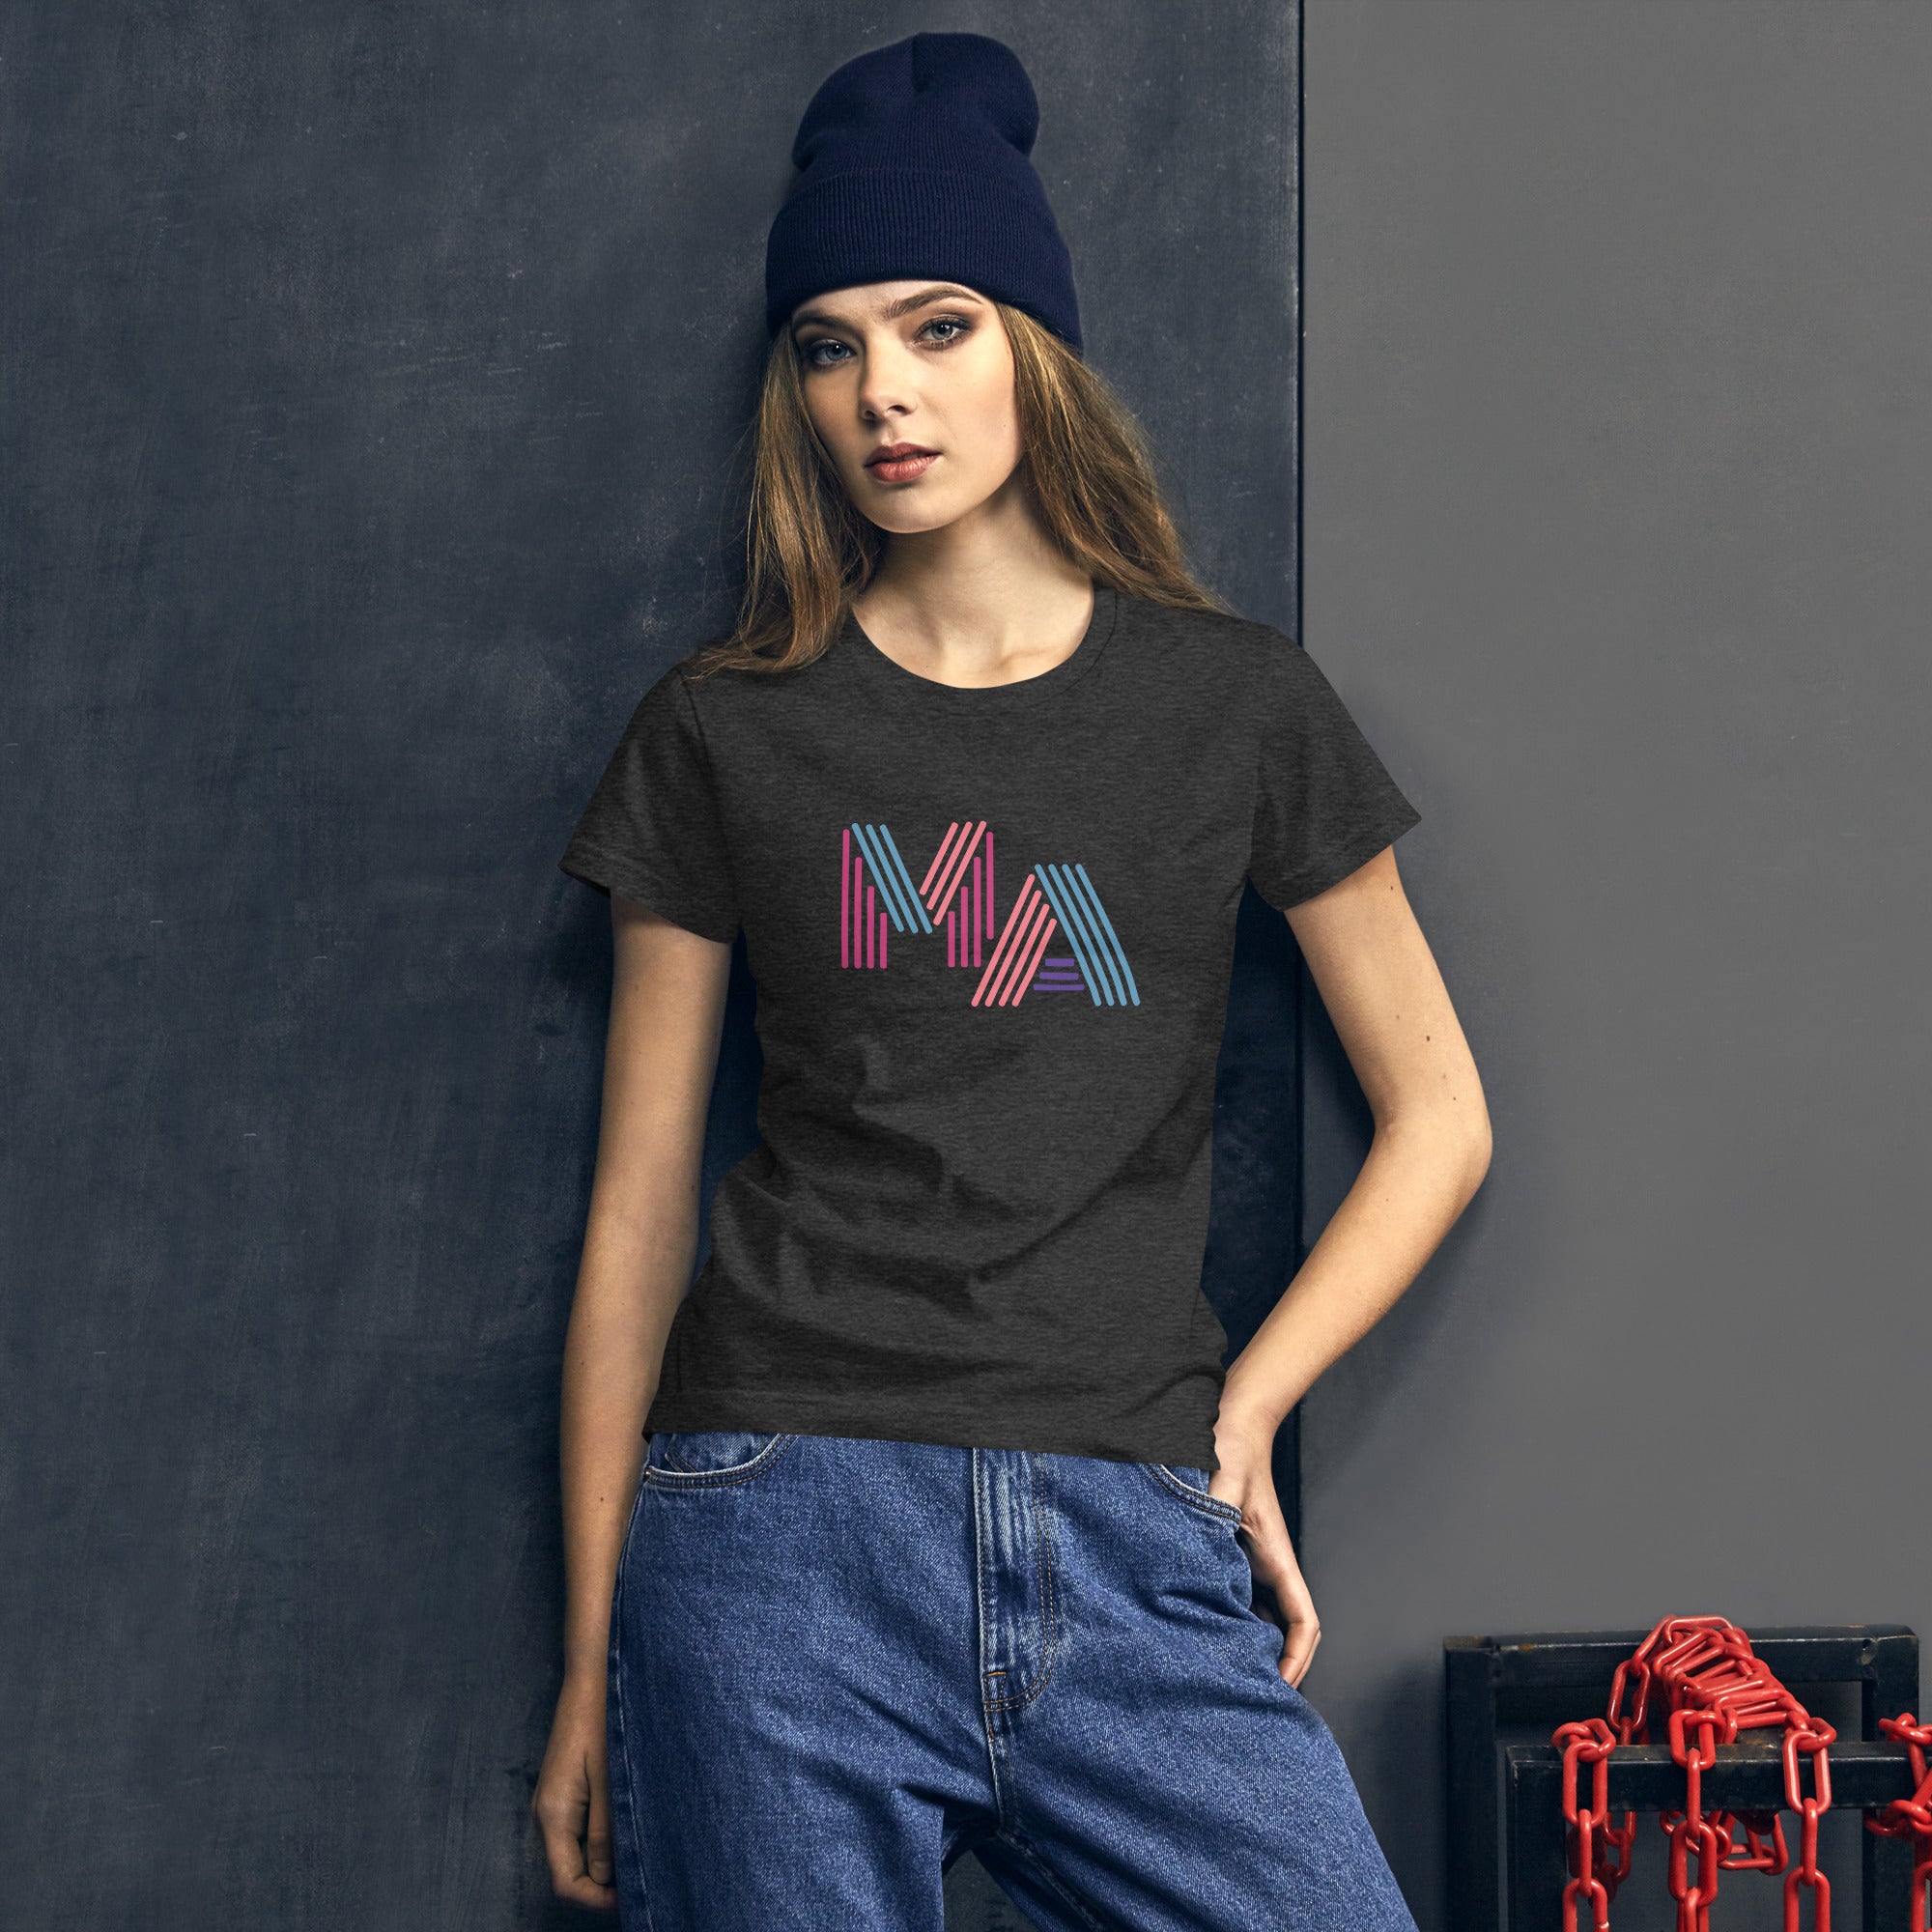 photo of woman wearing dark grey t-shirt with the letters MA in pink, orange, turquoise and purple neon light style lettering